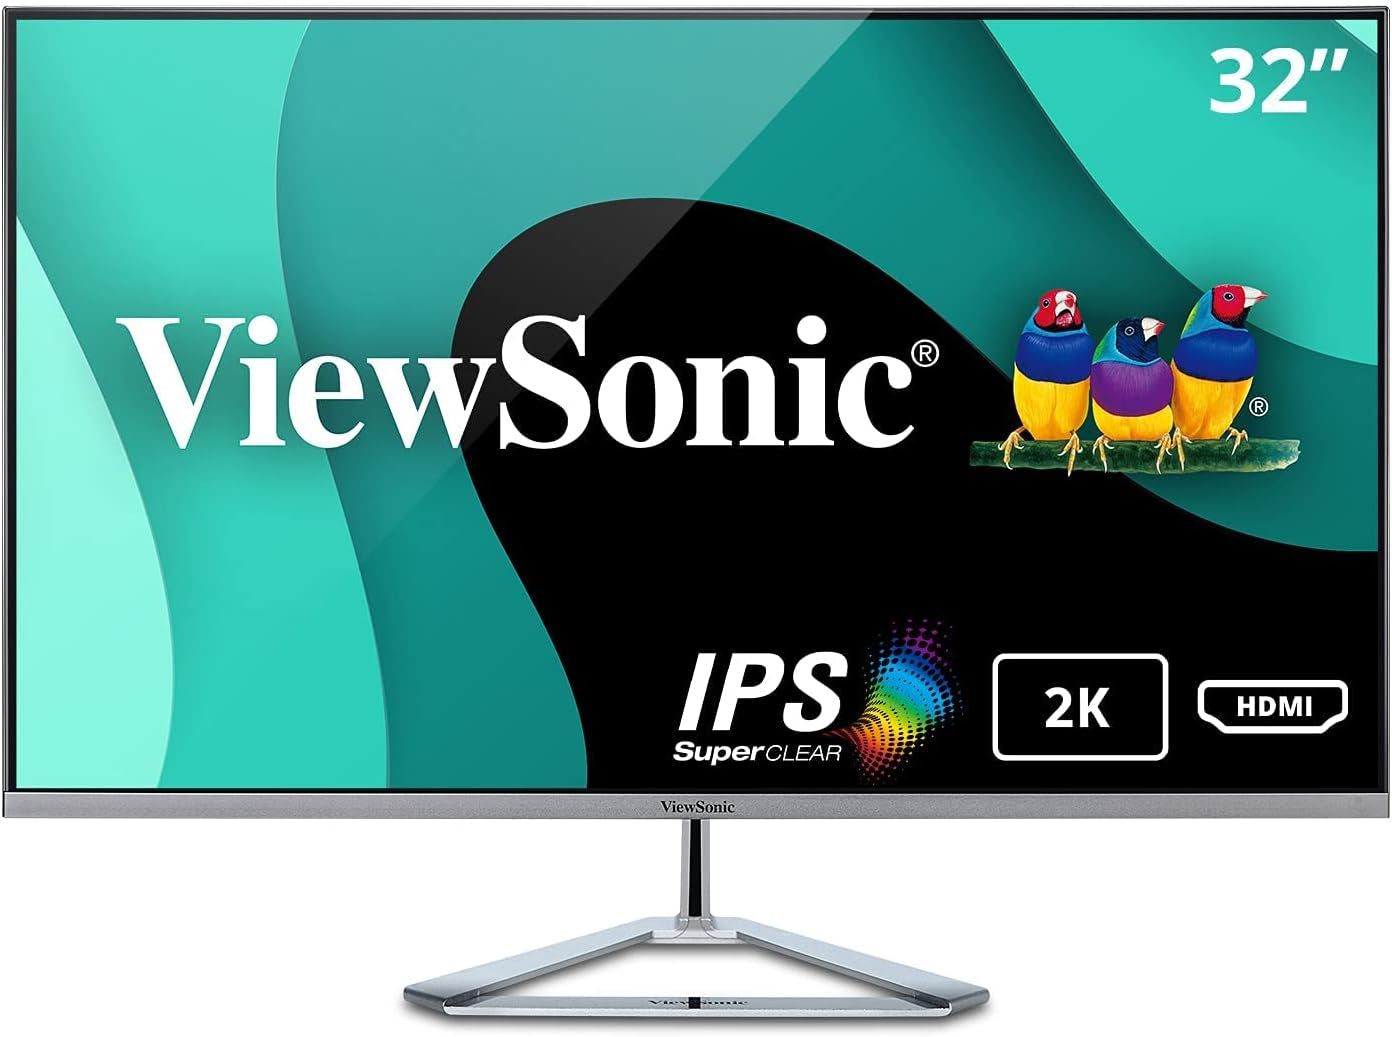 VX3276-2K-MHD 32 Inch IPS WQHD Monitor with 99% Srgb, 2X HDMI, Displayport, Mini Displayport, Eye Care for Work and Entertainment at Home, Silver/Black